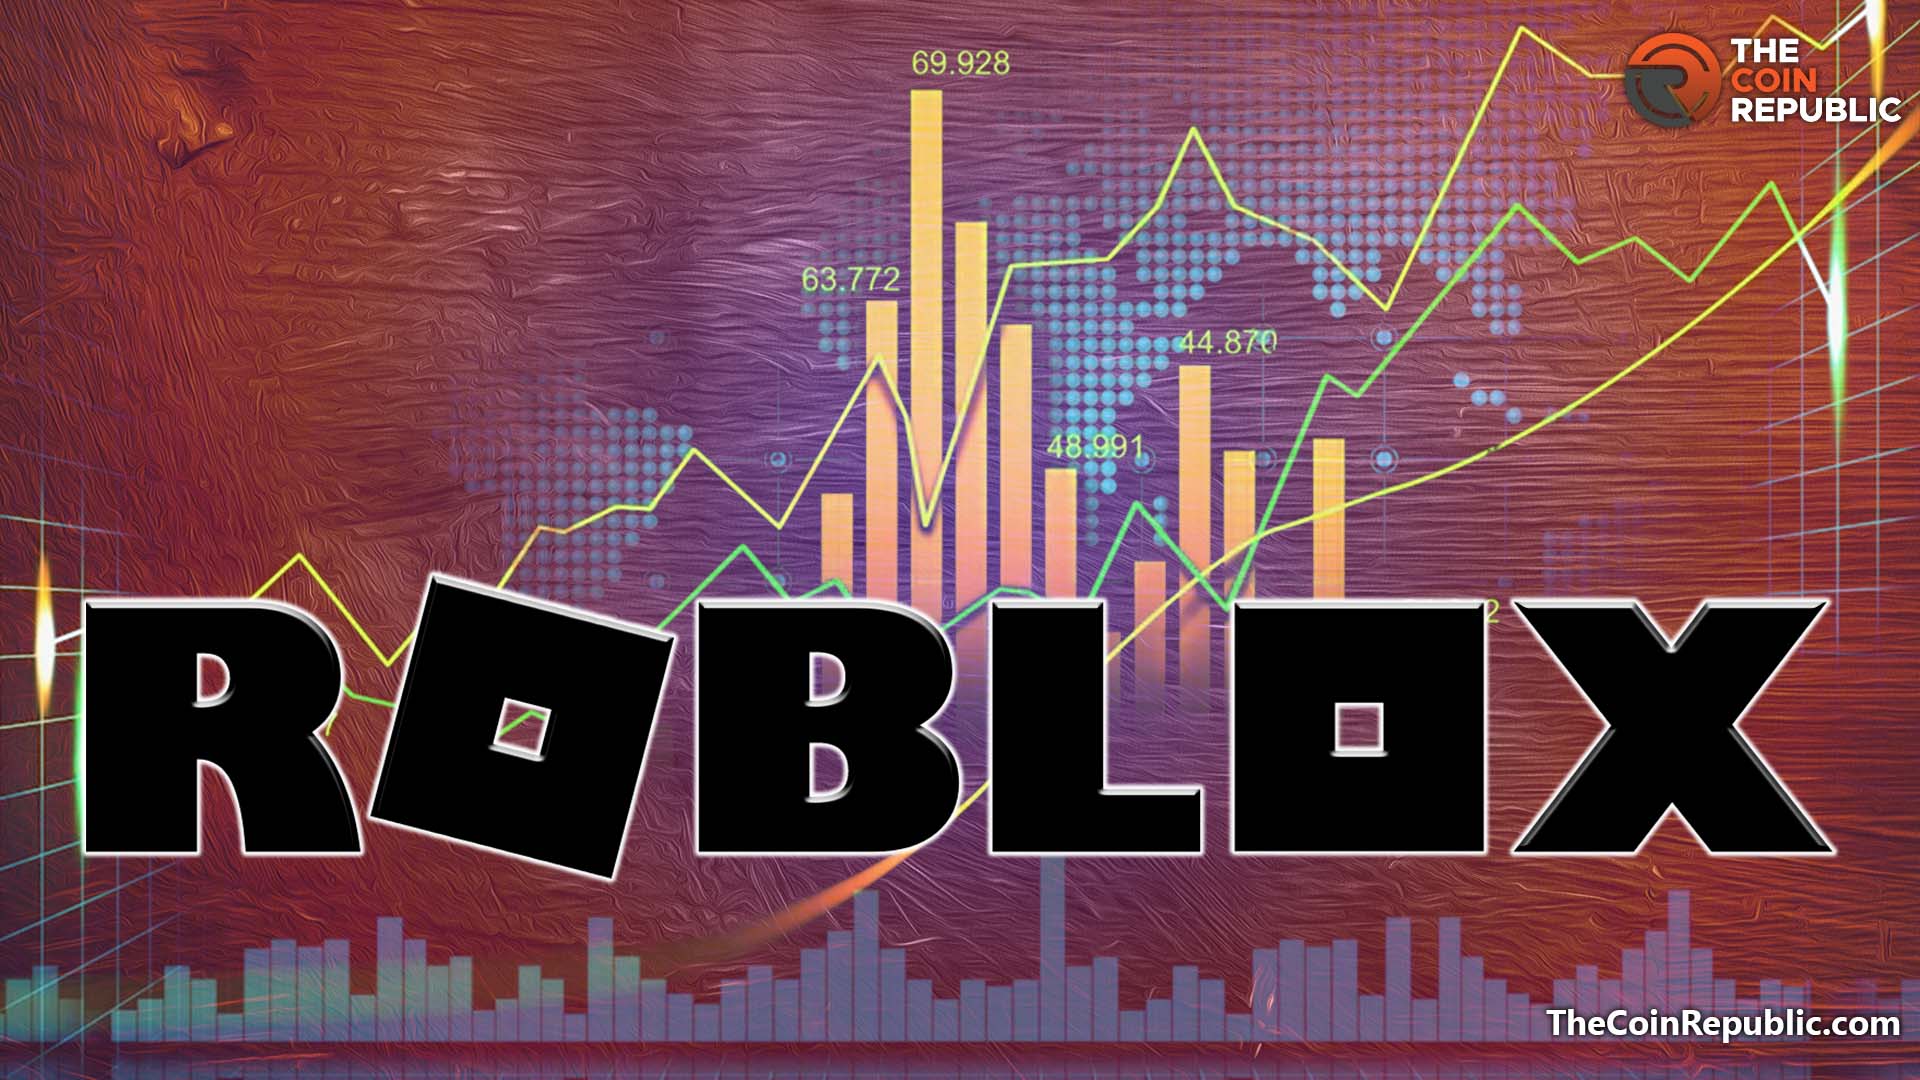 Roblox stock price prediction: What's next for the metaverse builder?